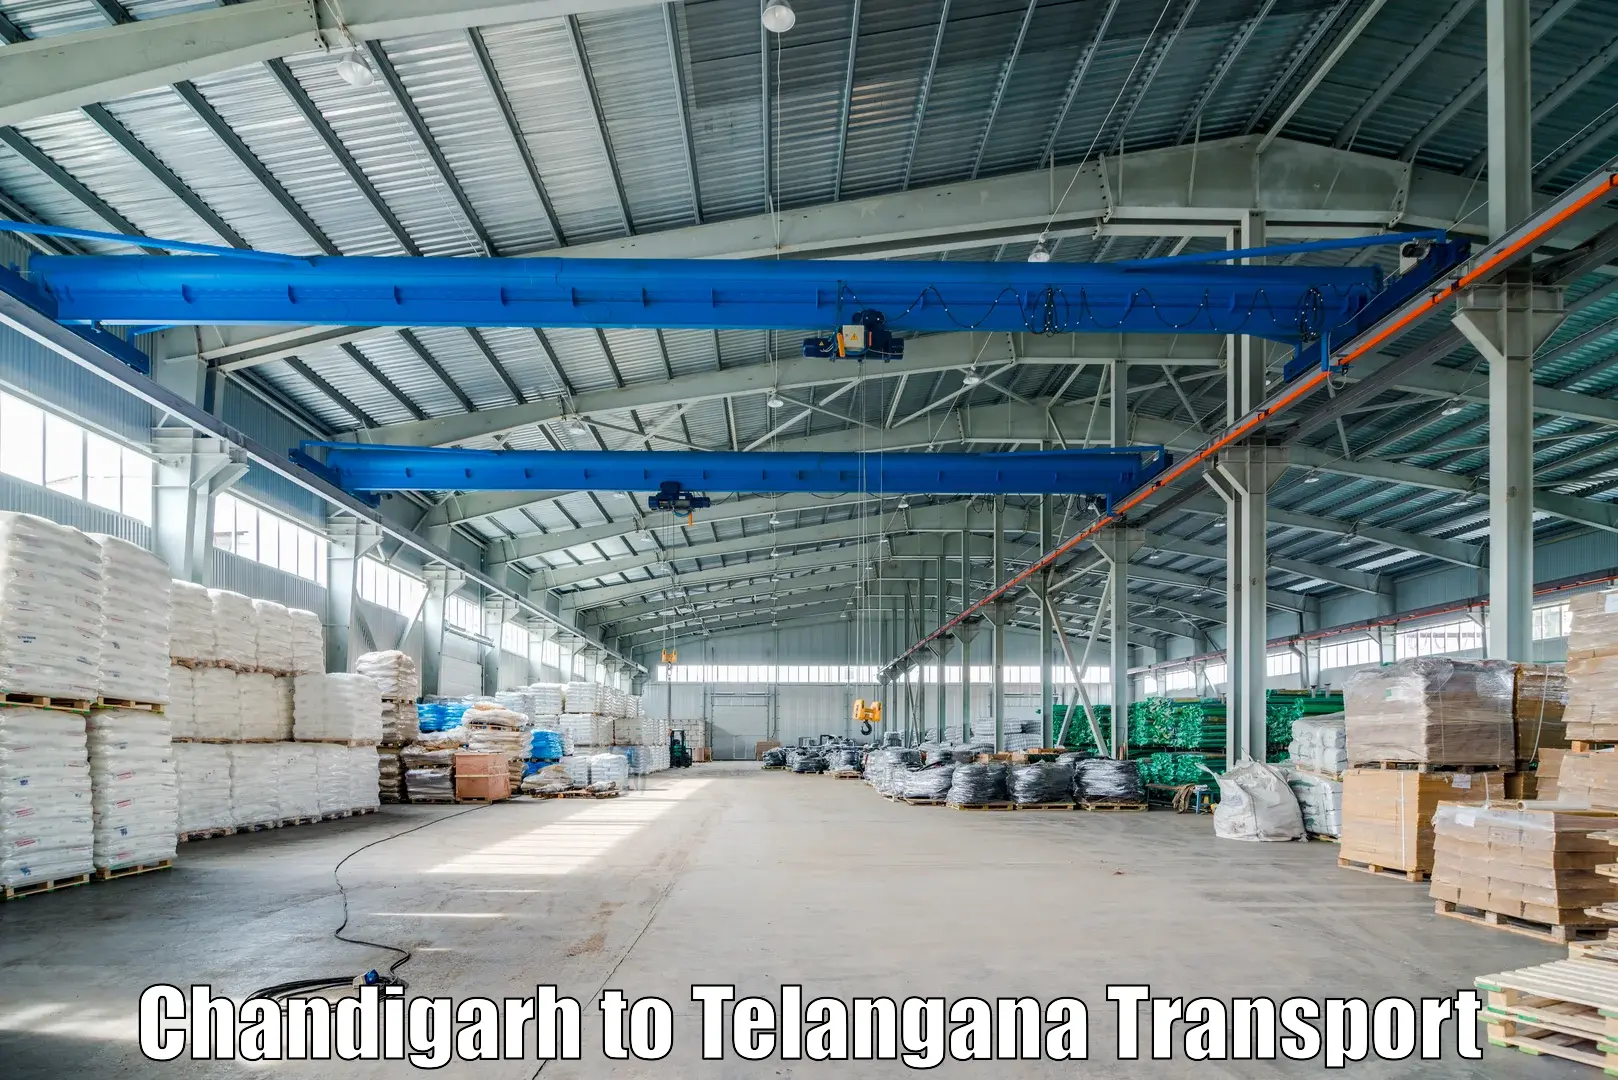 Daily parcel service transport Chandigarh to Telangana